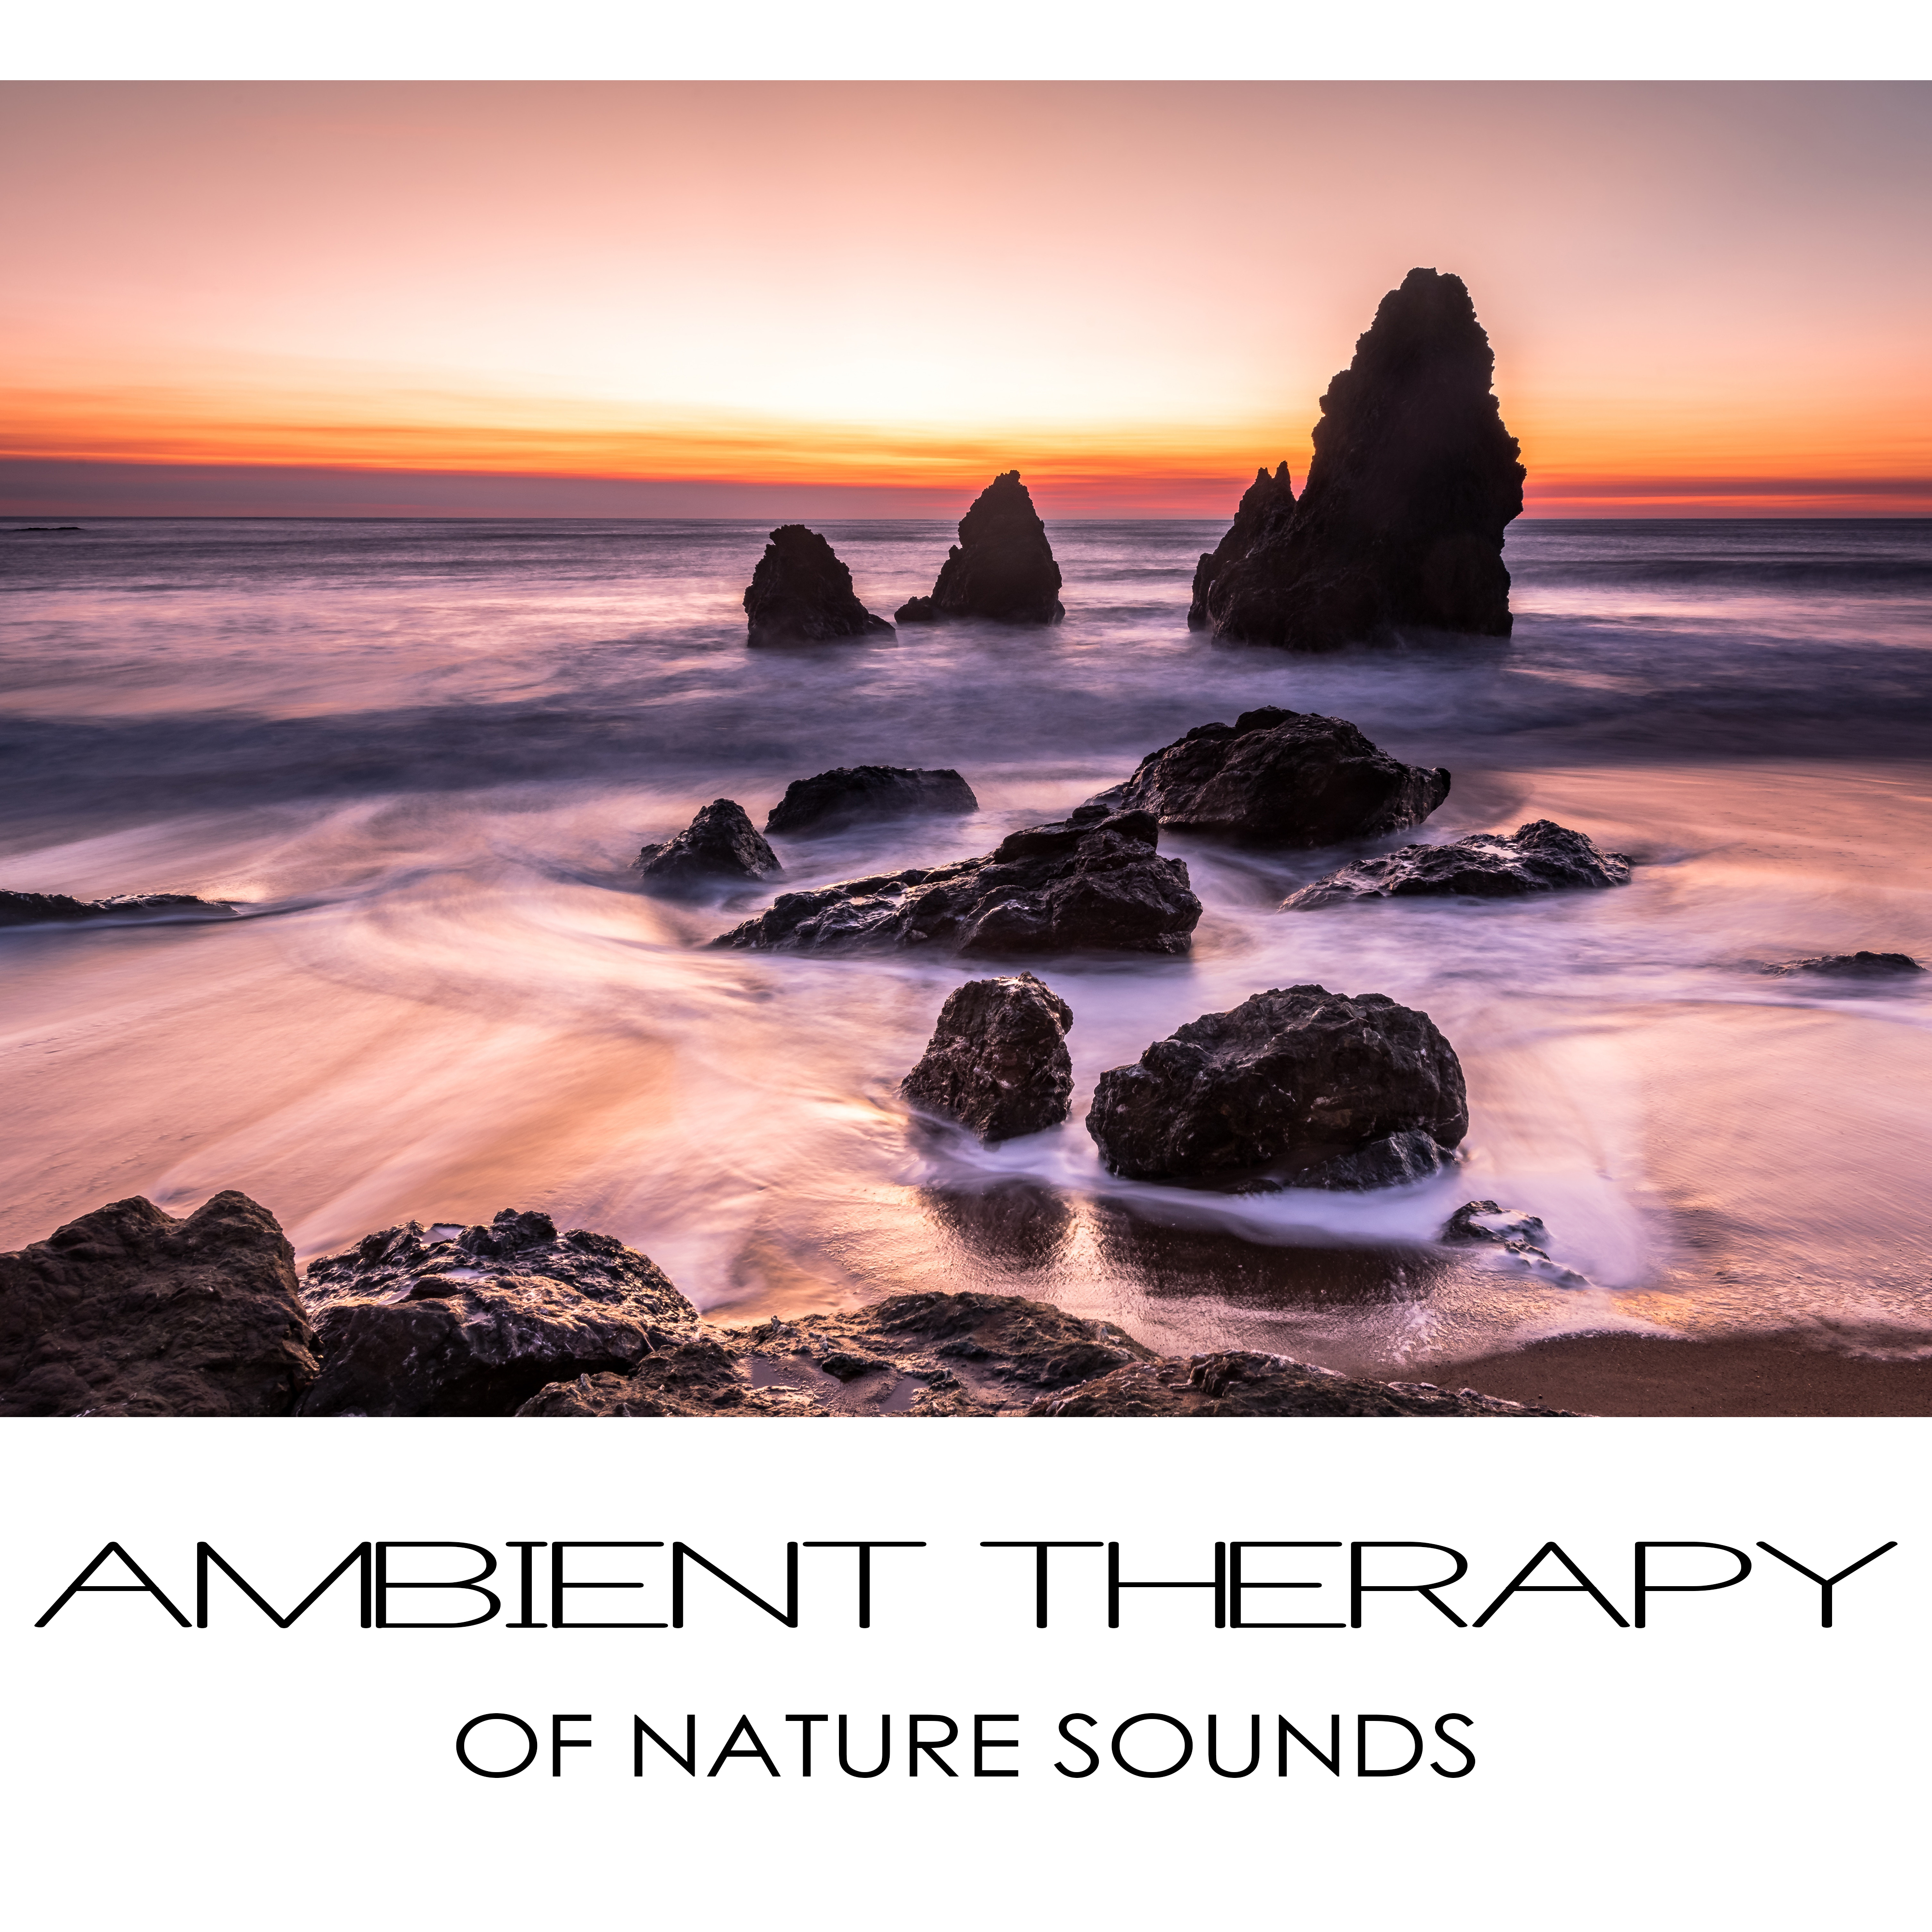 Ambient Therapy of Nature Sounds